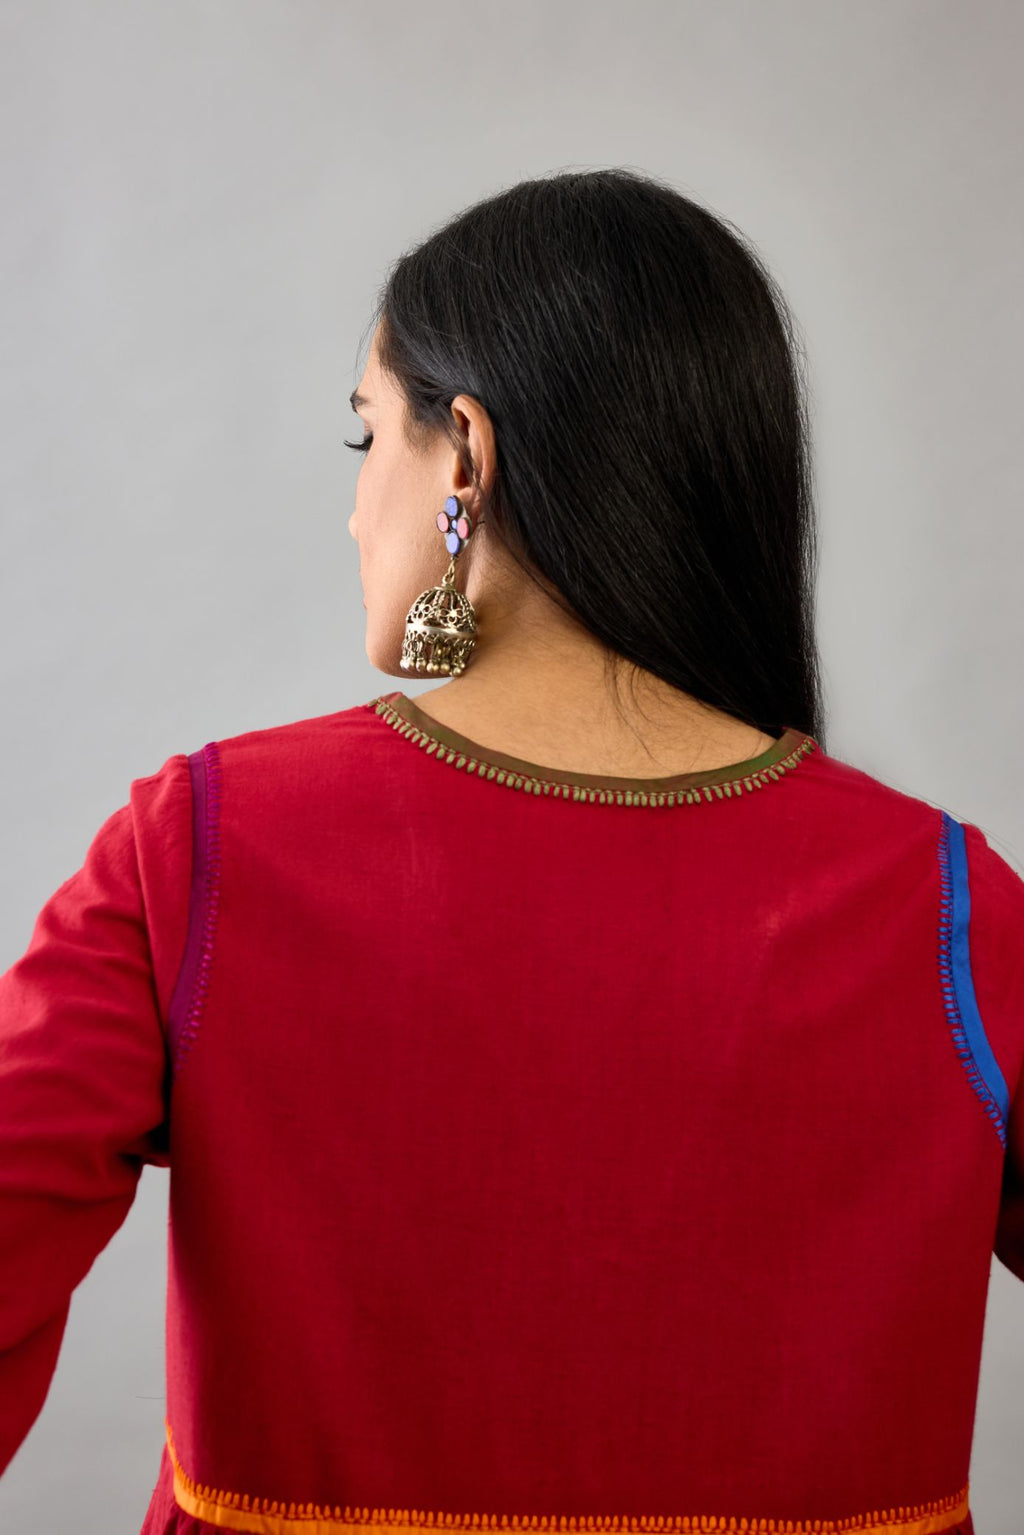 Red Handloom Cotton kurta set dress with multi colored silk facing and embroidery details.